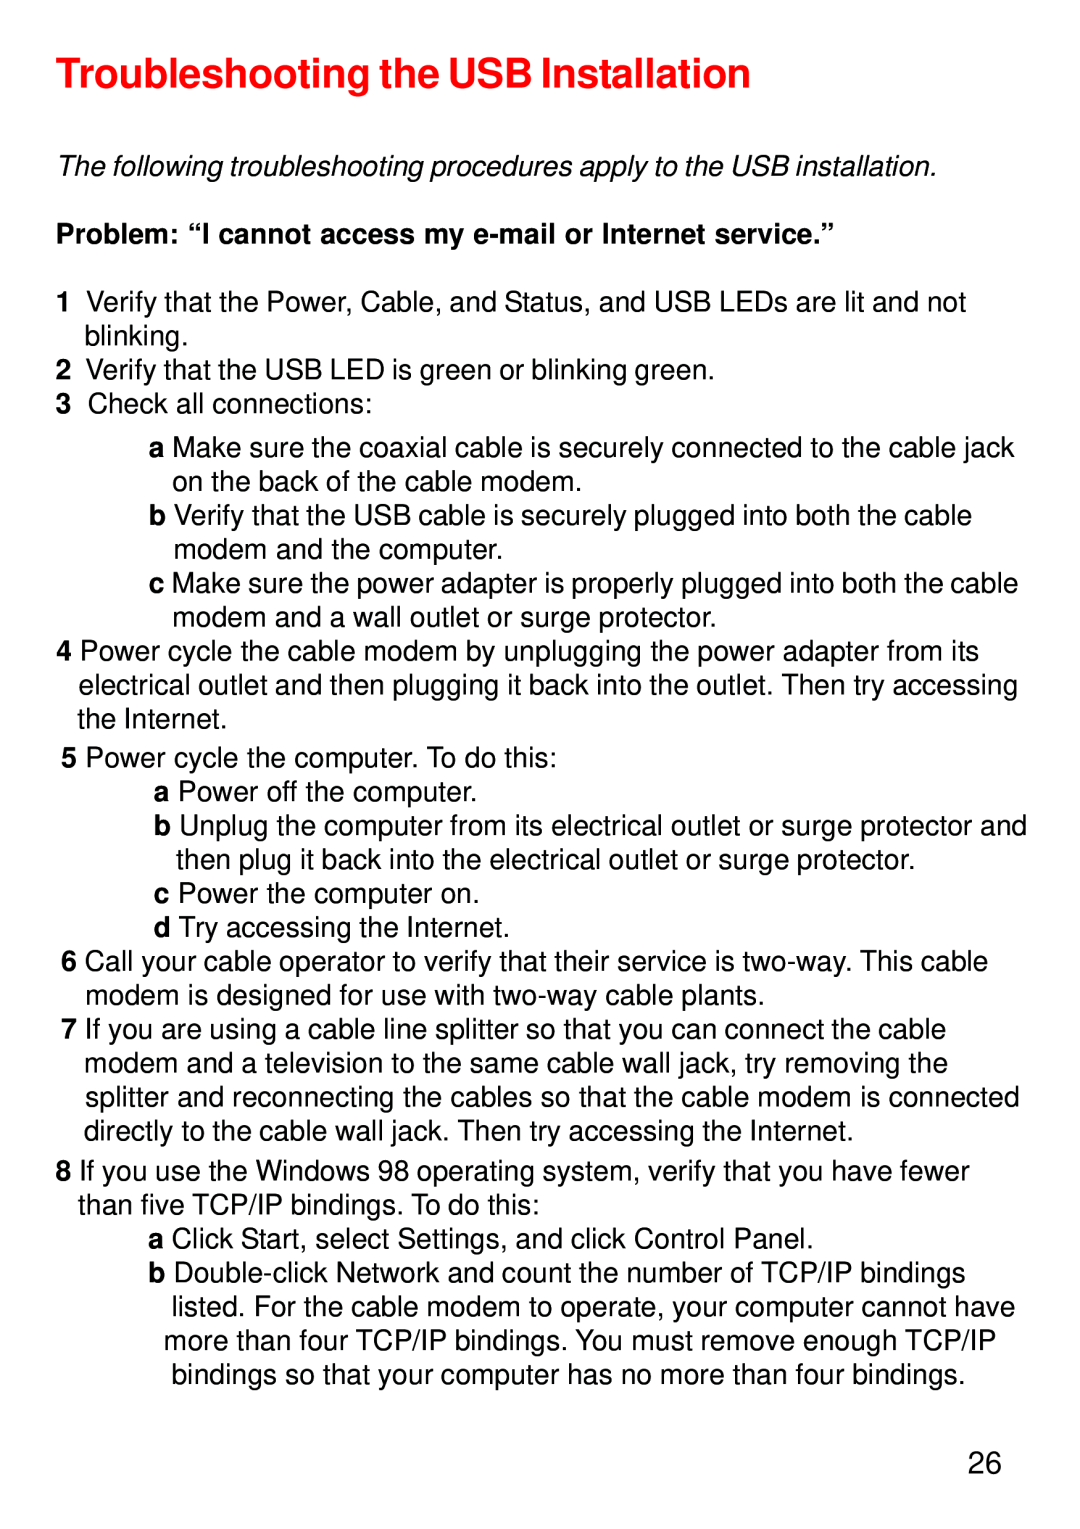 D-Link DCM-202 manual Troubleshooting the USB Installation, Problem “I cannot access my e-mail or Internet service.” 